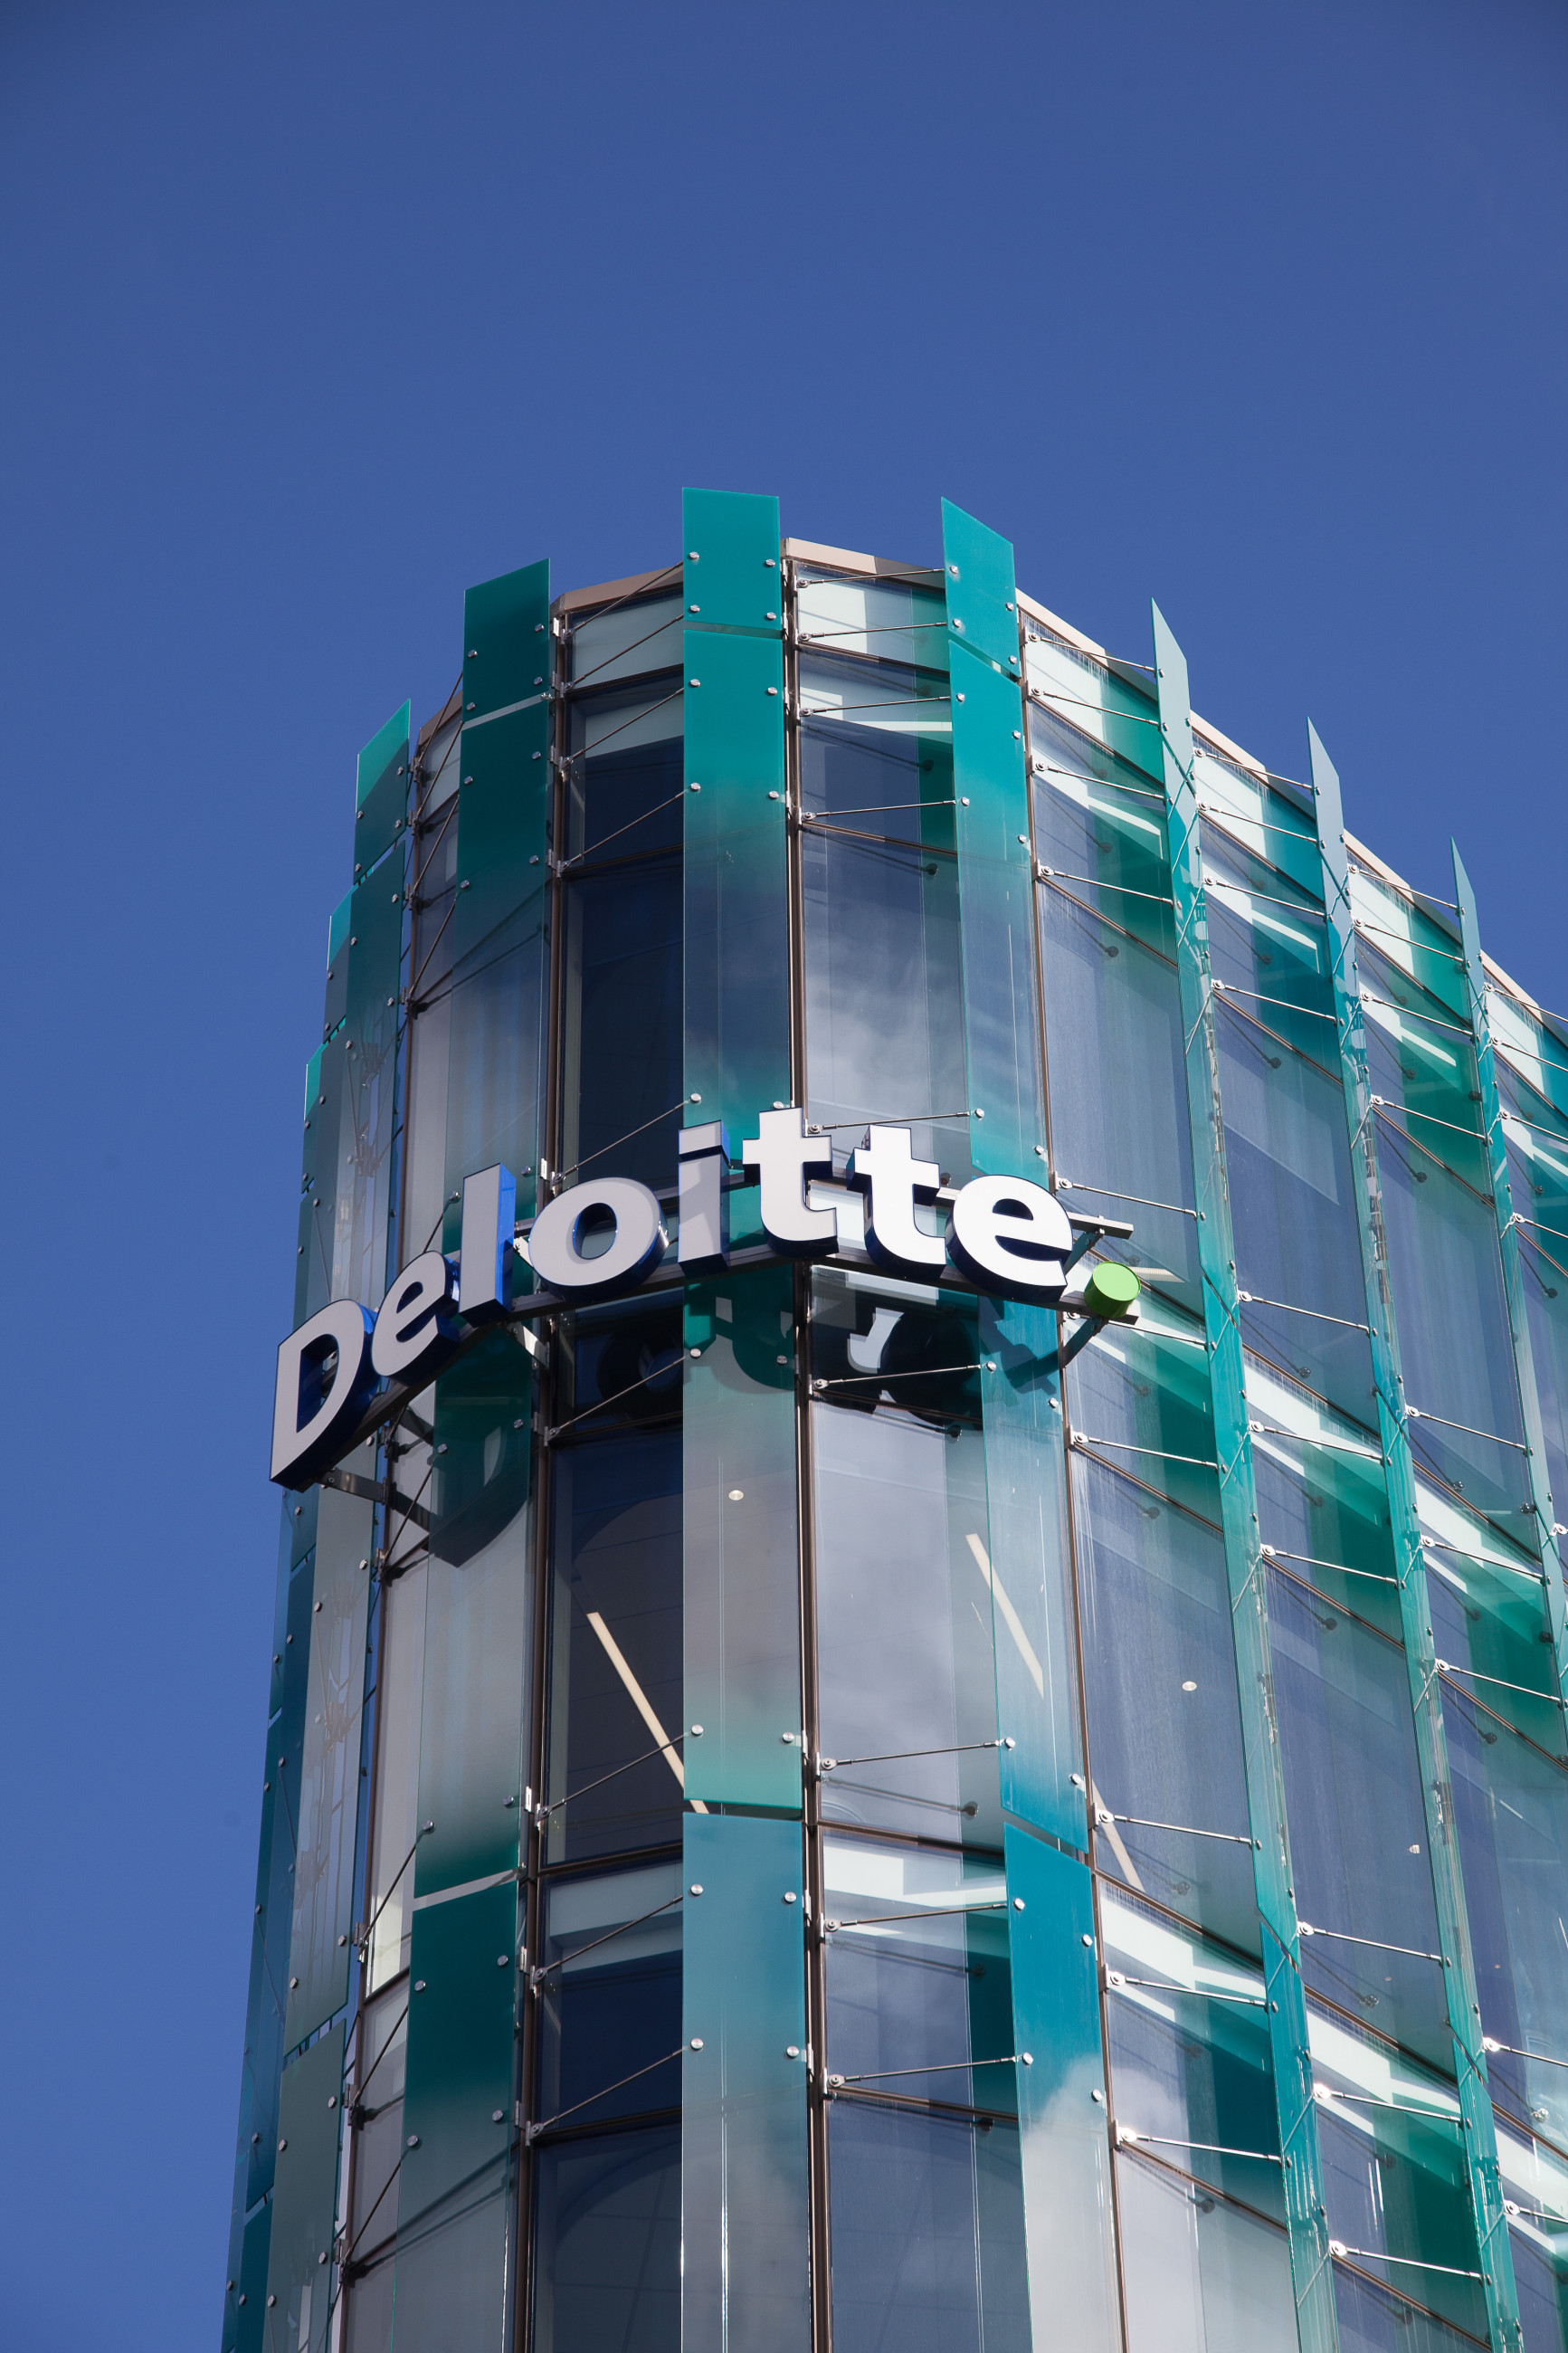 Modern building with glass windows and highlighted facade with deloitte words on it